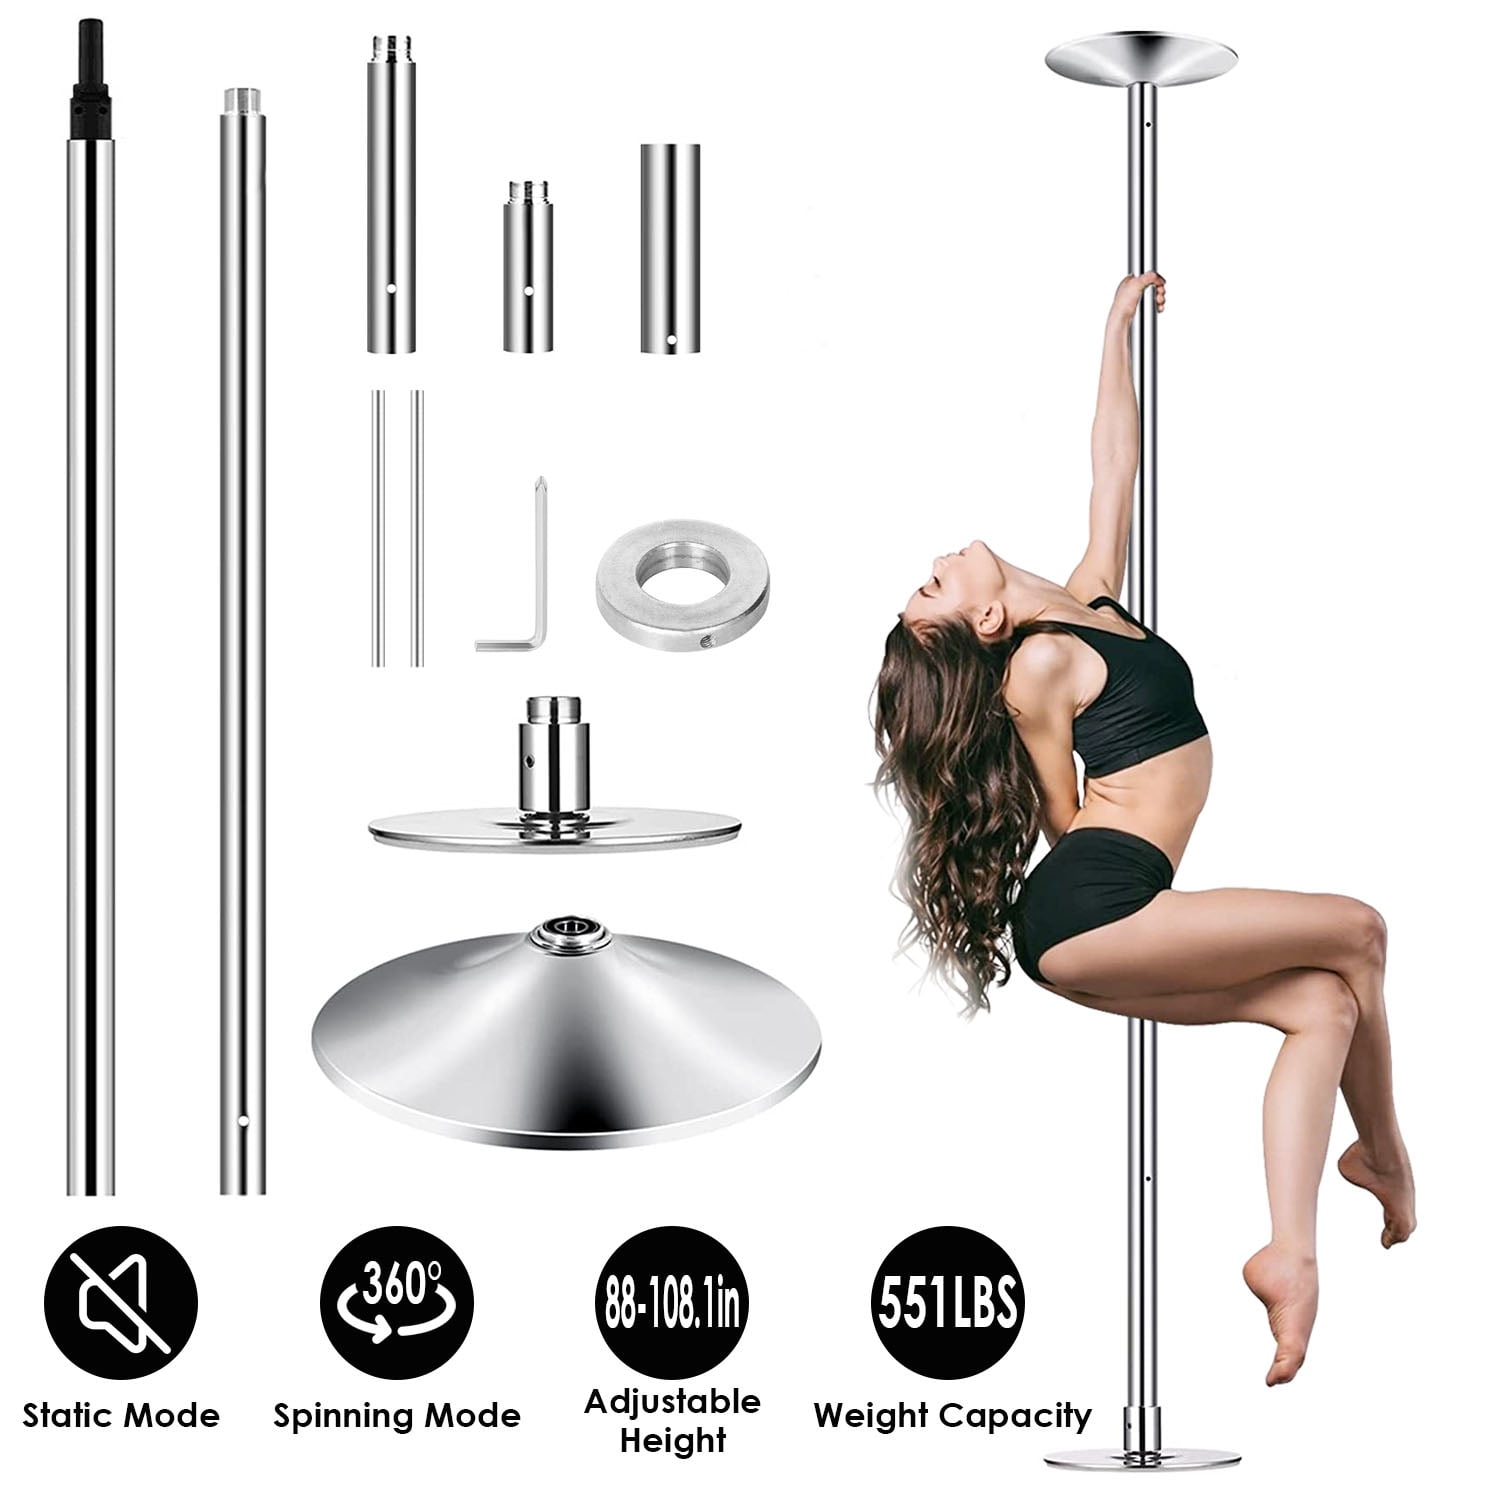 Dance Pole for Home, iMounTEK Stripper Dance Pole 45mm Spinning Static  Dancing Pole with 88-108.1in Adjustable Height 551Lbs Weight Capacity for